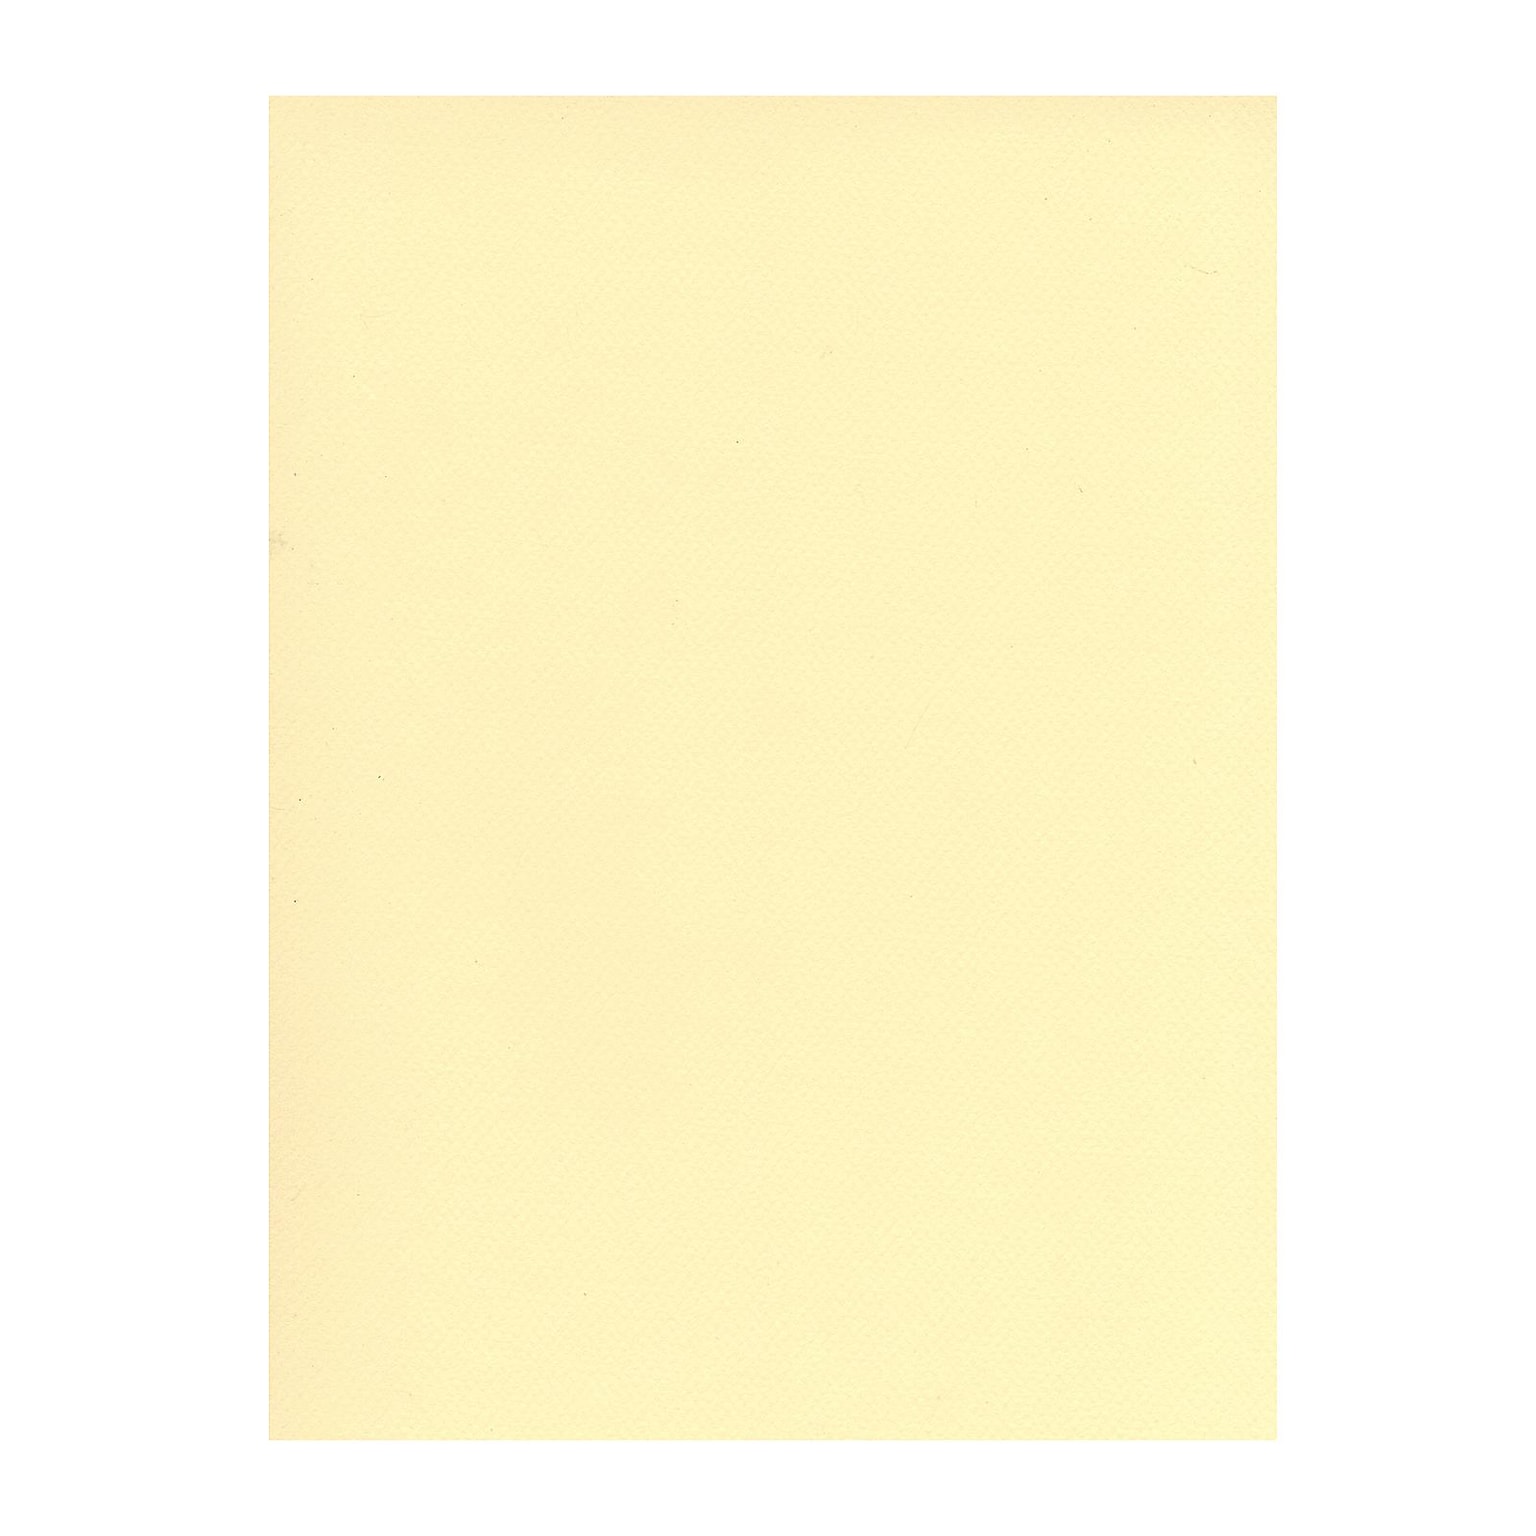 Canson Mi-Teintes Tinted Paper pale yellow 19 in. x 25 in. [Pack of 10](PK10-100511217)